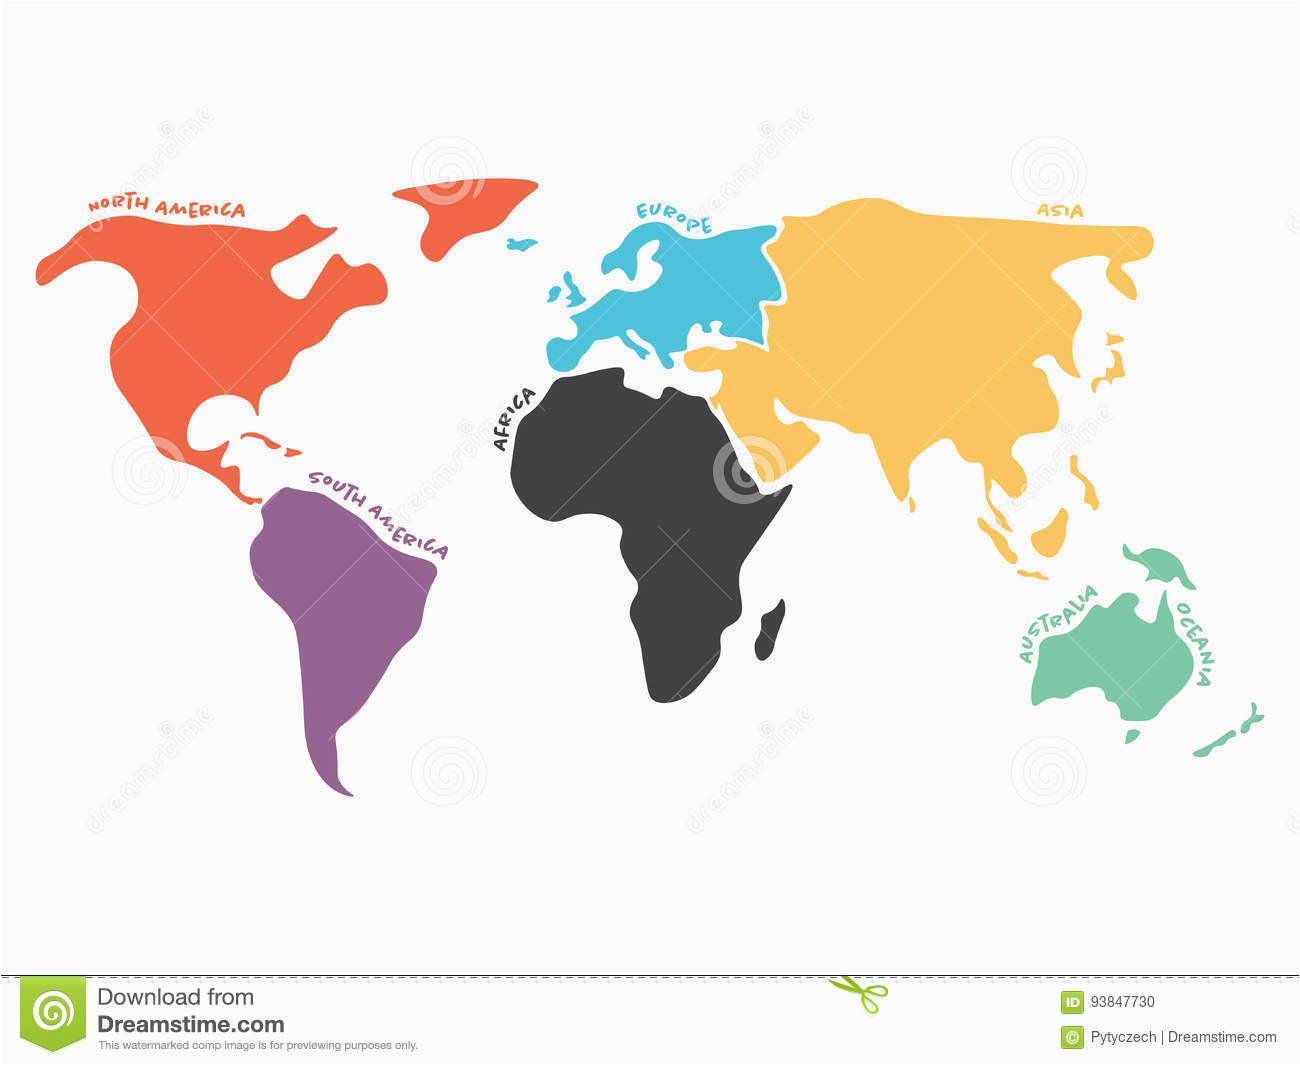 multicolored simplified world map divided to continents